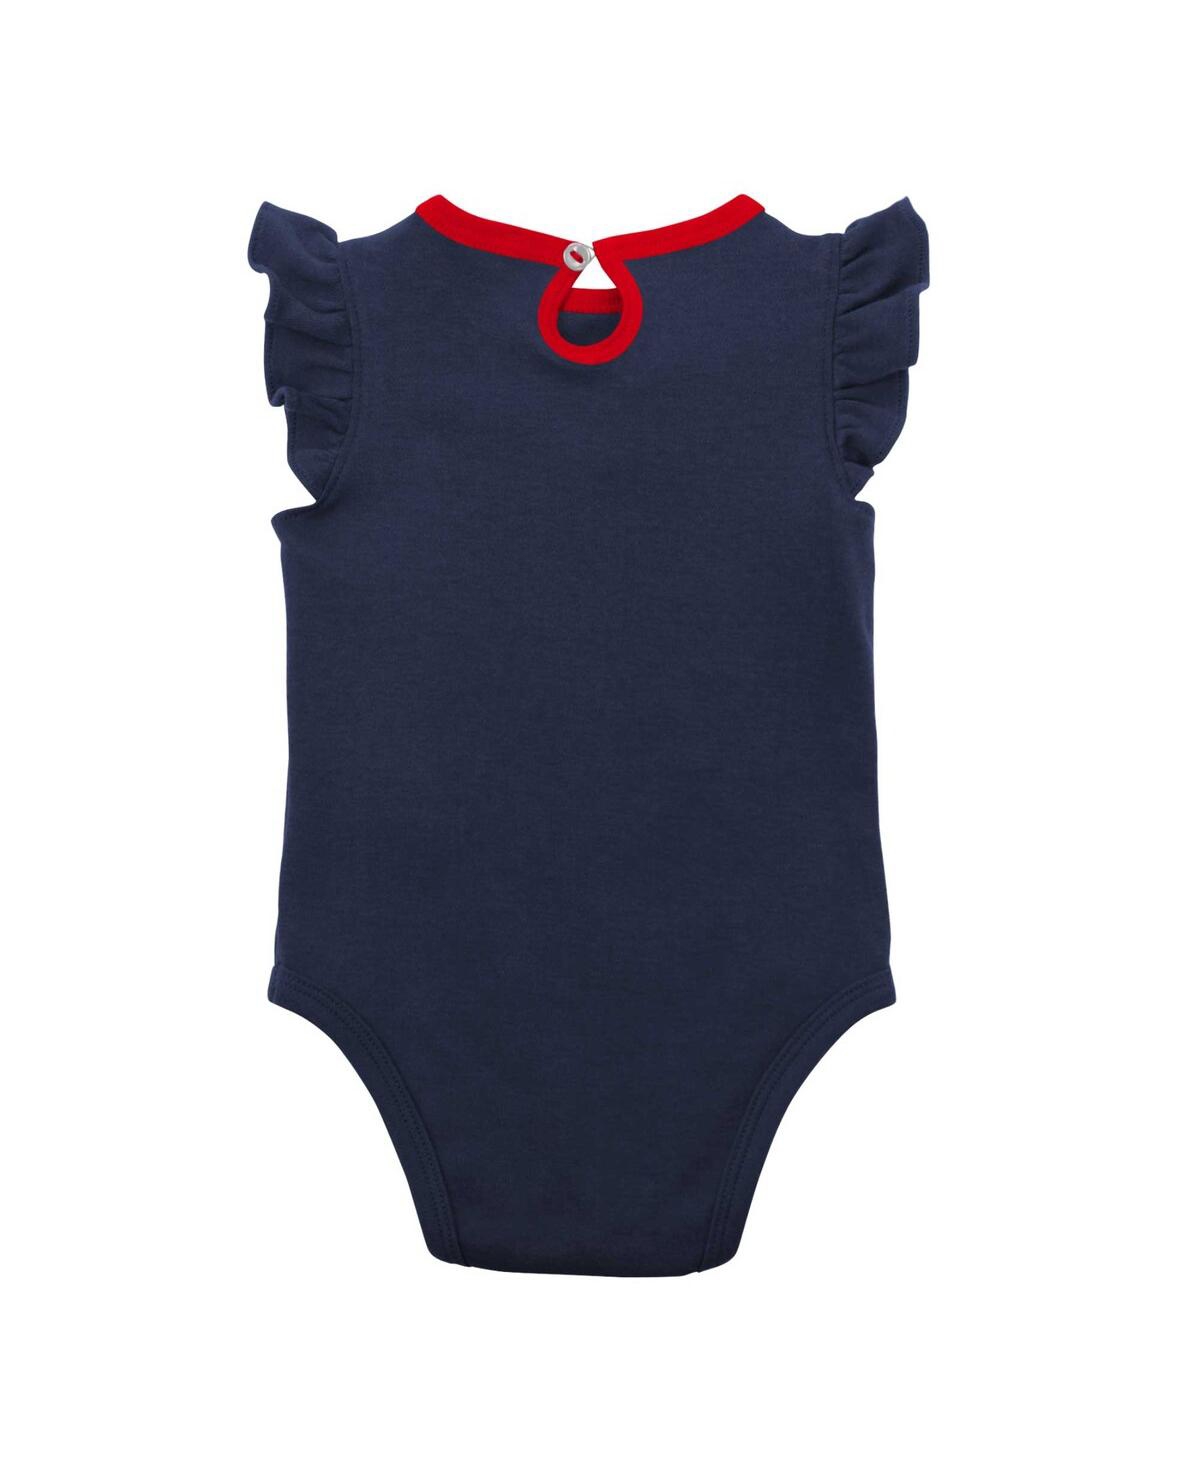 Shop Outerstuff Newborn And Infant Boys And Girls Navy, Red Atlanta Braves Three-piece Love Of Baseball Bib Bodysuit In Navy,red